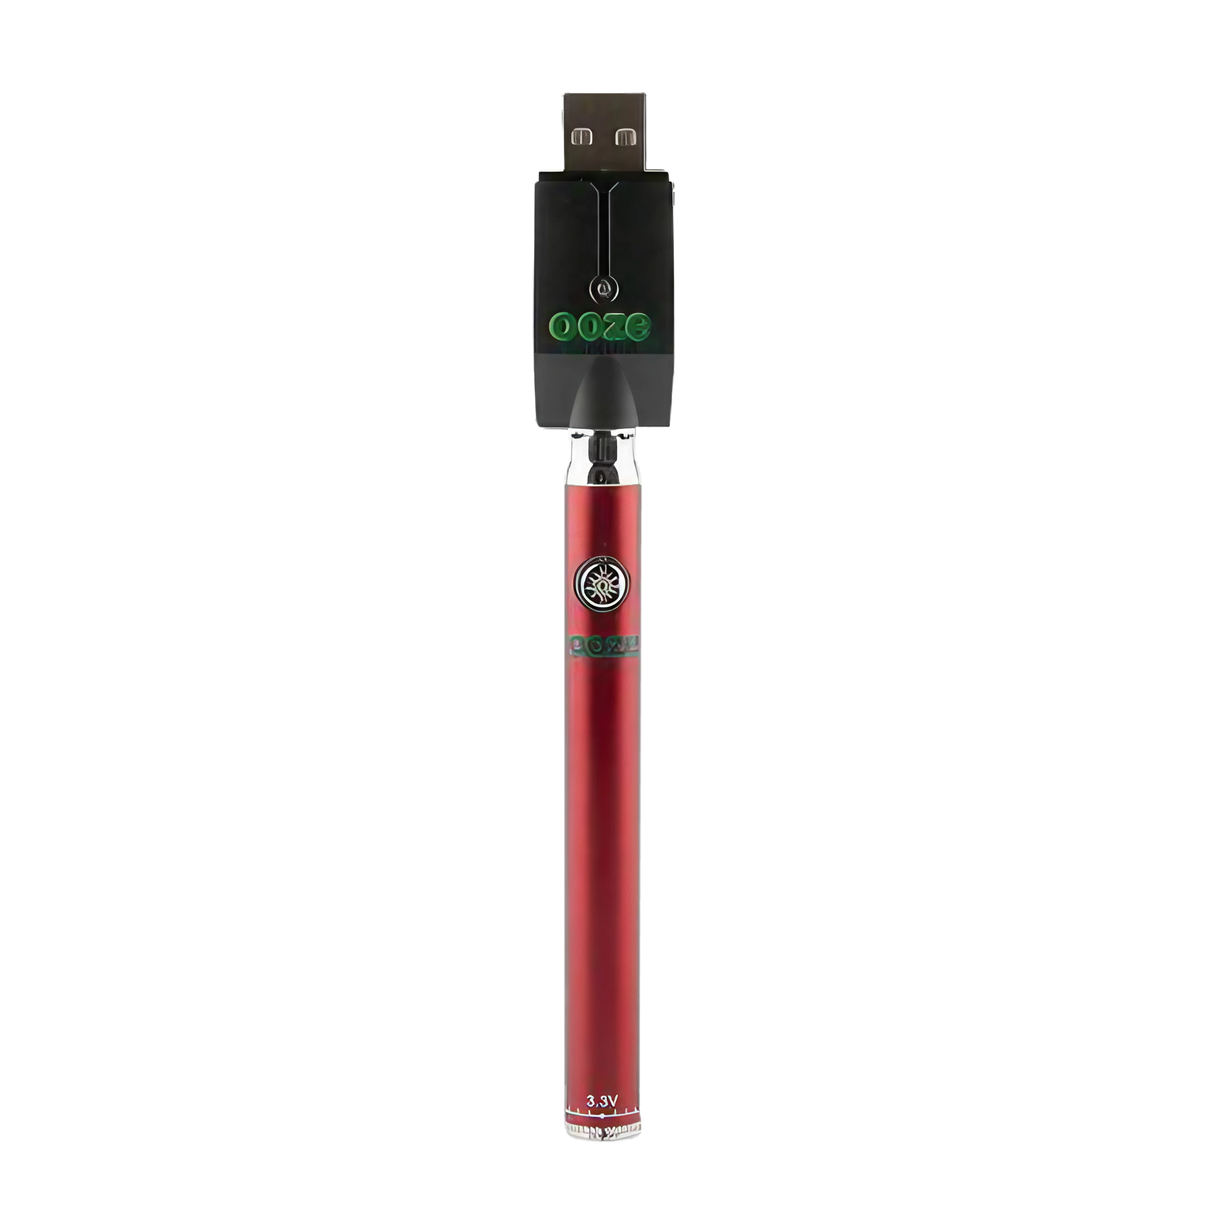 Ooze Slim Twist Battery in Red with USB Charger, 510 Thread, Front View